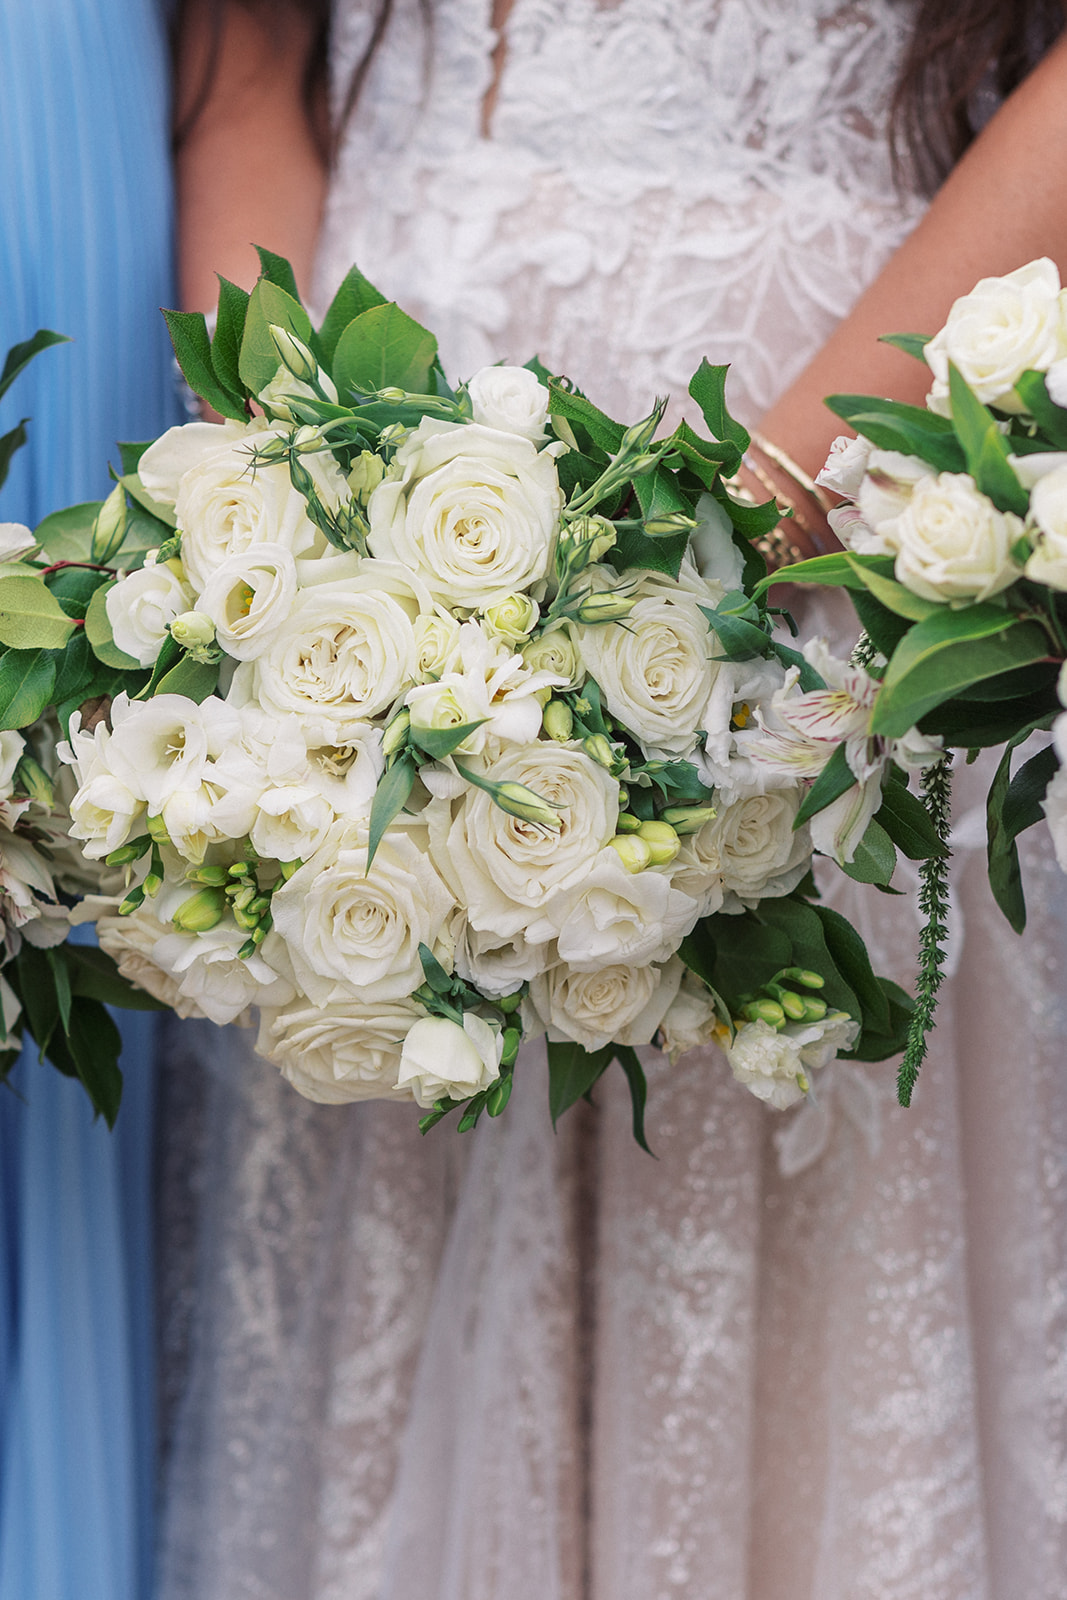 Details of a bride's white rose bouquet as she holds it in front of her